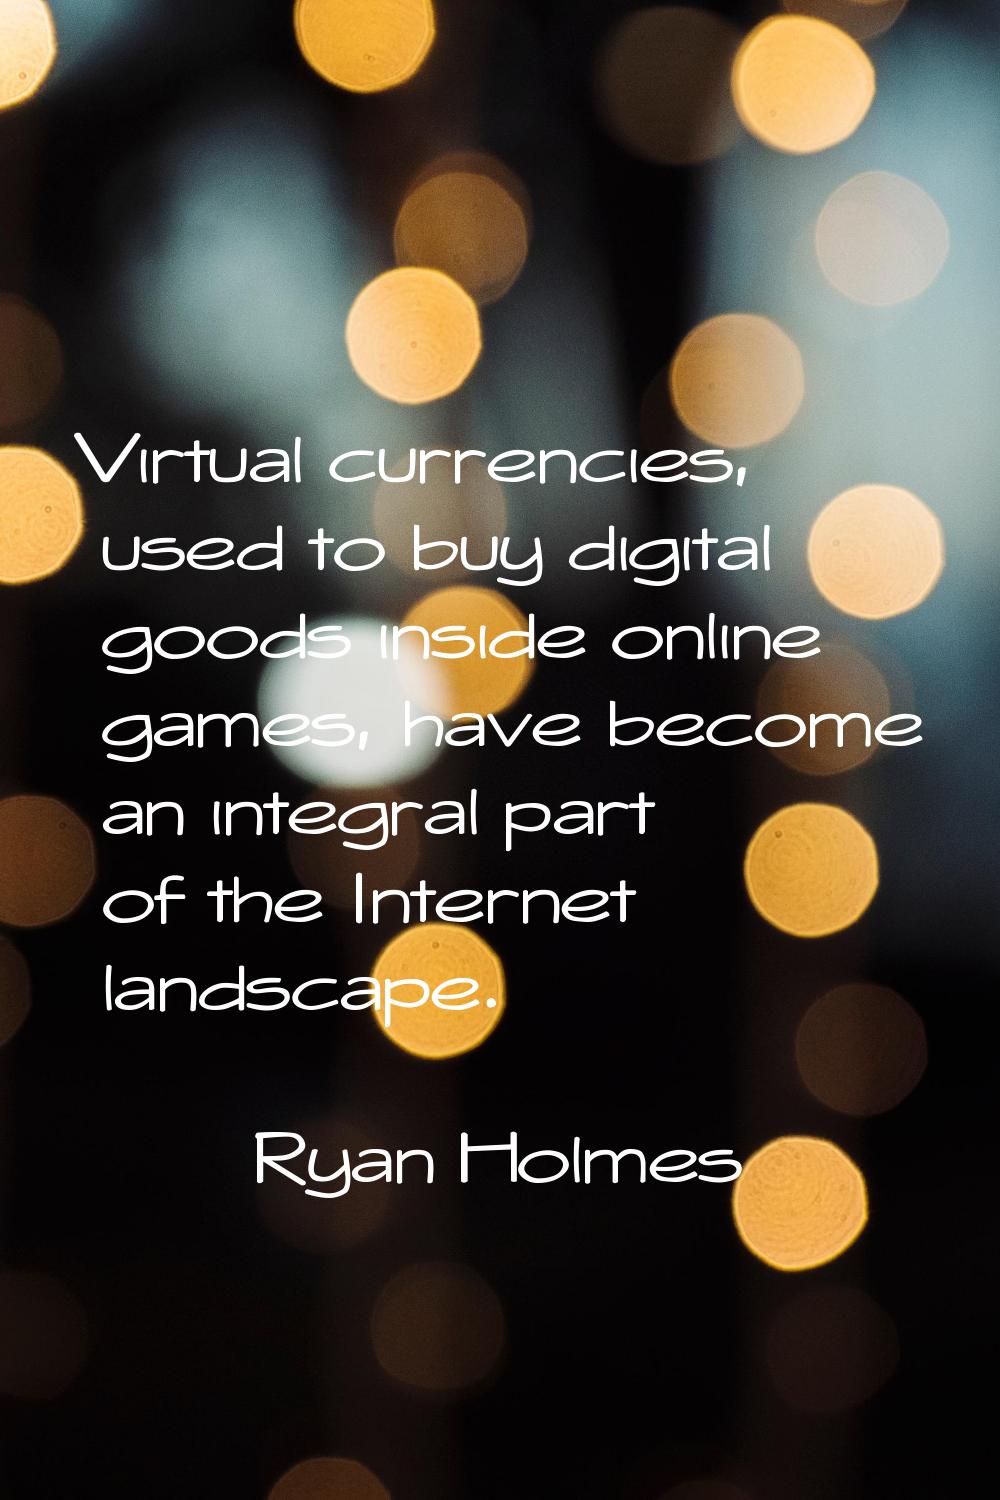 Virtual currencies, used to buy digital goods inside online games, have become an integral part of 